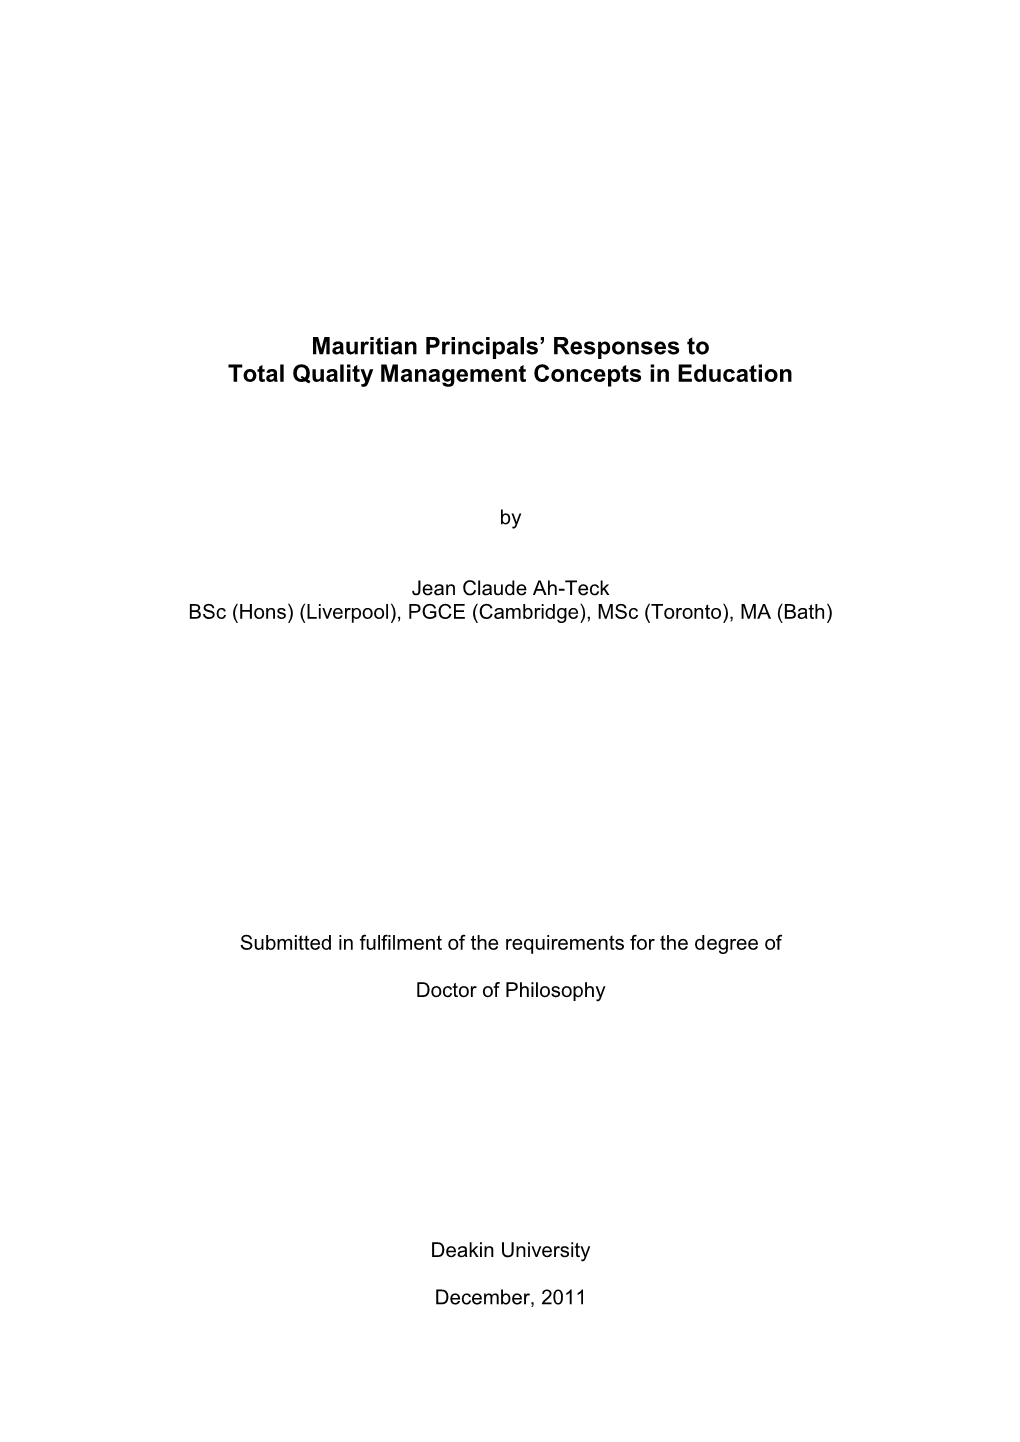 Mauritian Principals' Responses to Total Quality Management